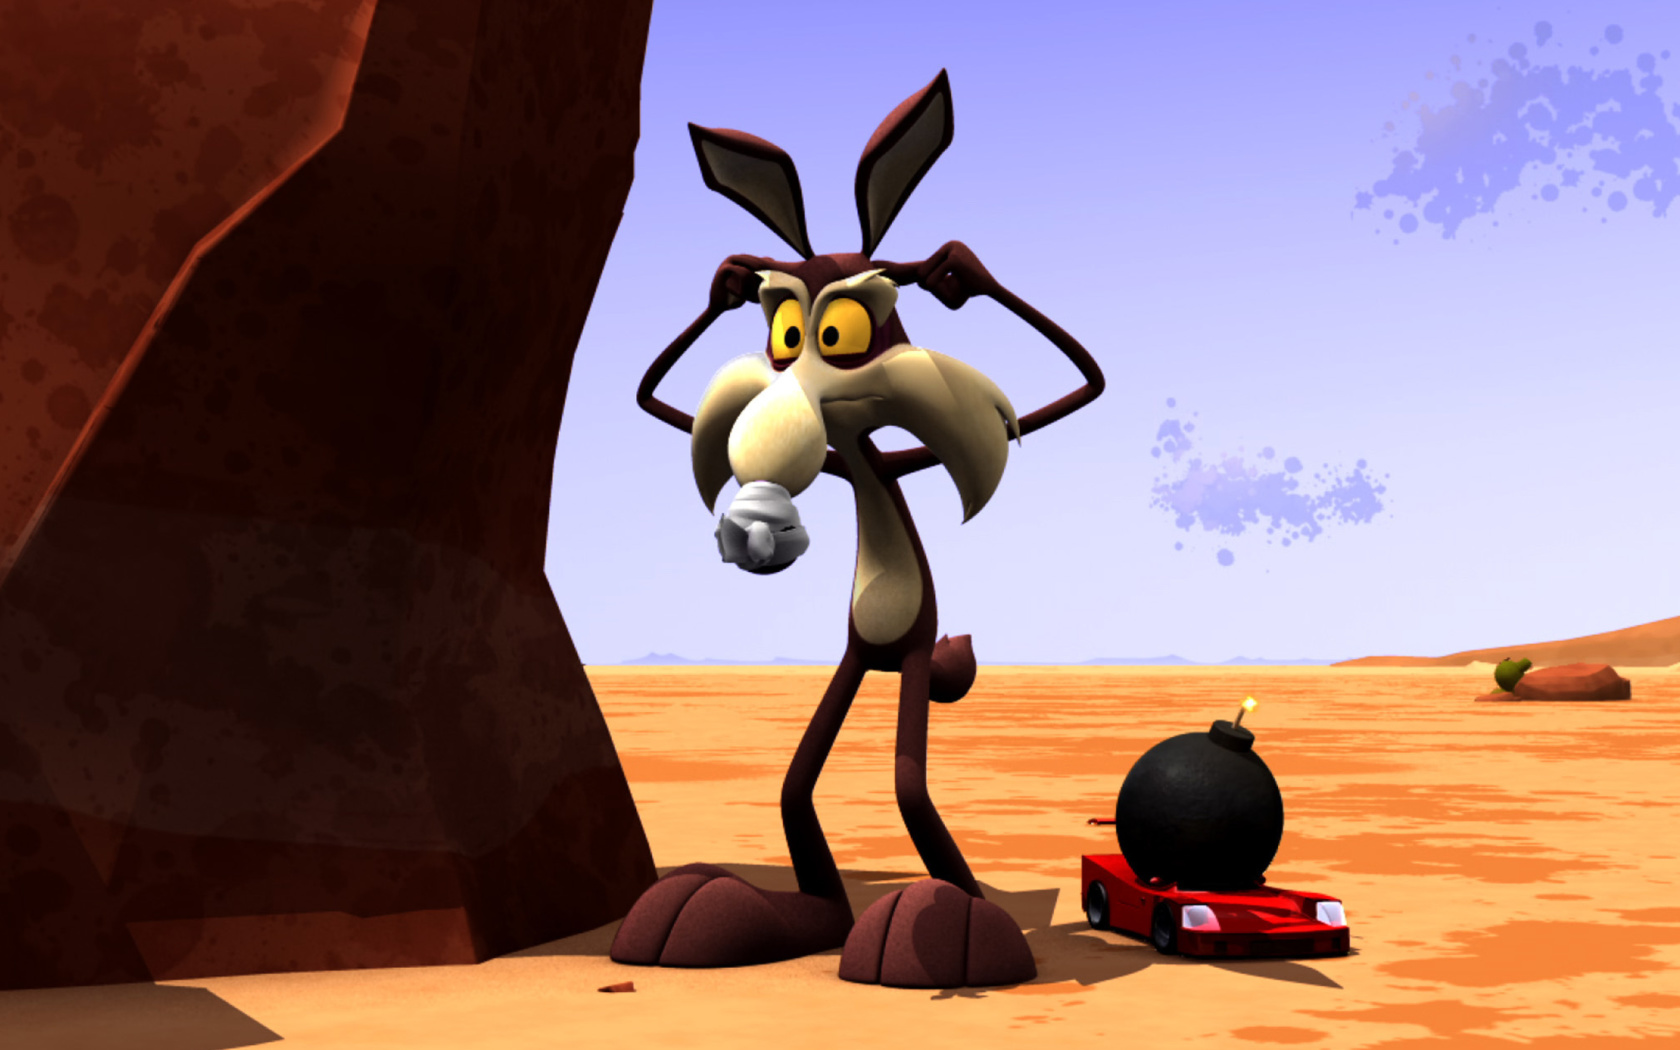 Das Wile E Coyote and Road Runner Wallpaper 1680x1050